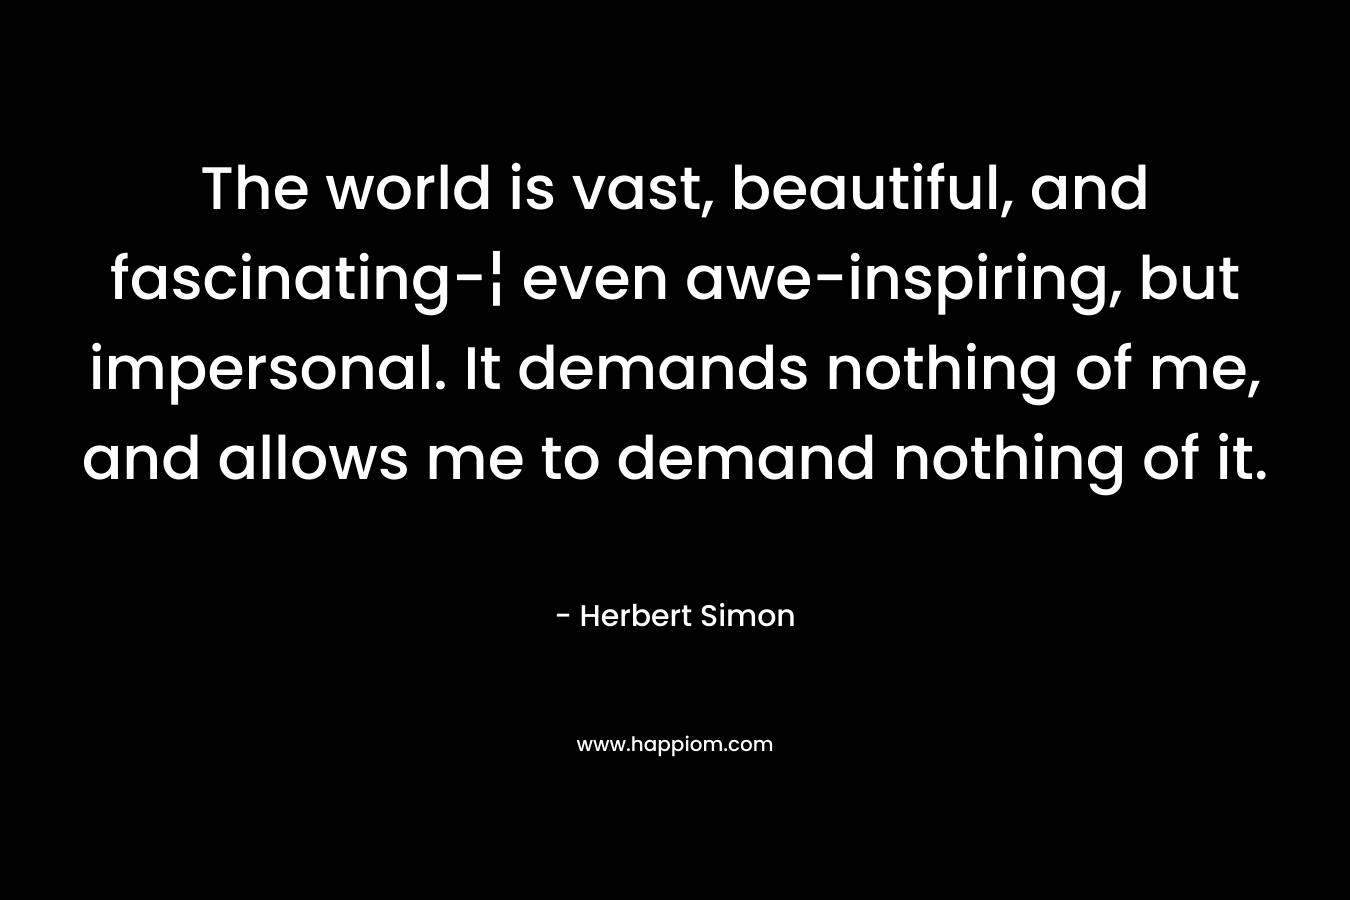 The world is vast, beautiful, and fascinating-¦ even awe-inspiring, but impersonal. It demands nothing of me, and allows me to demand nothing of it. – Herbert Simon